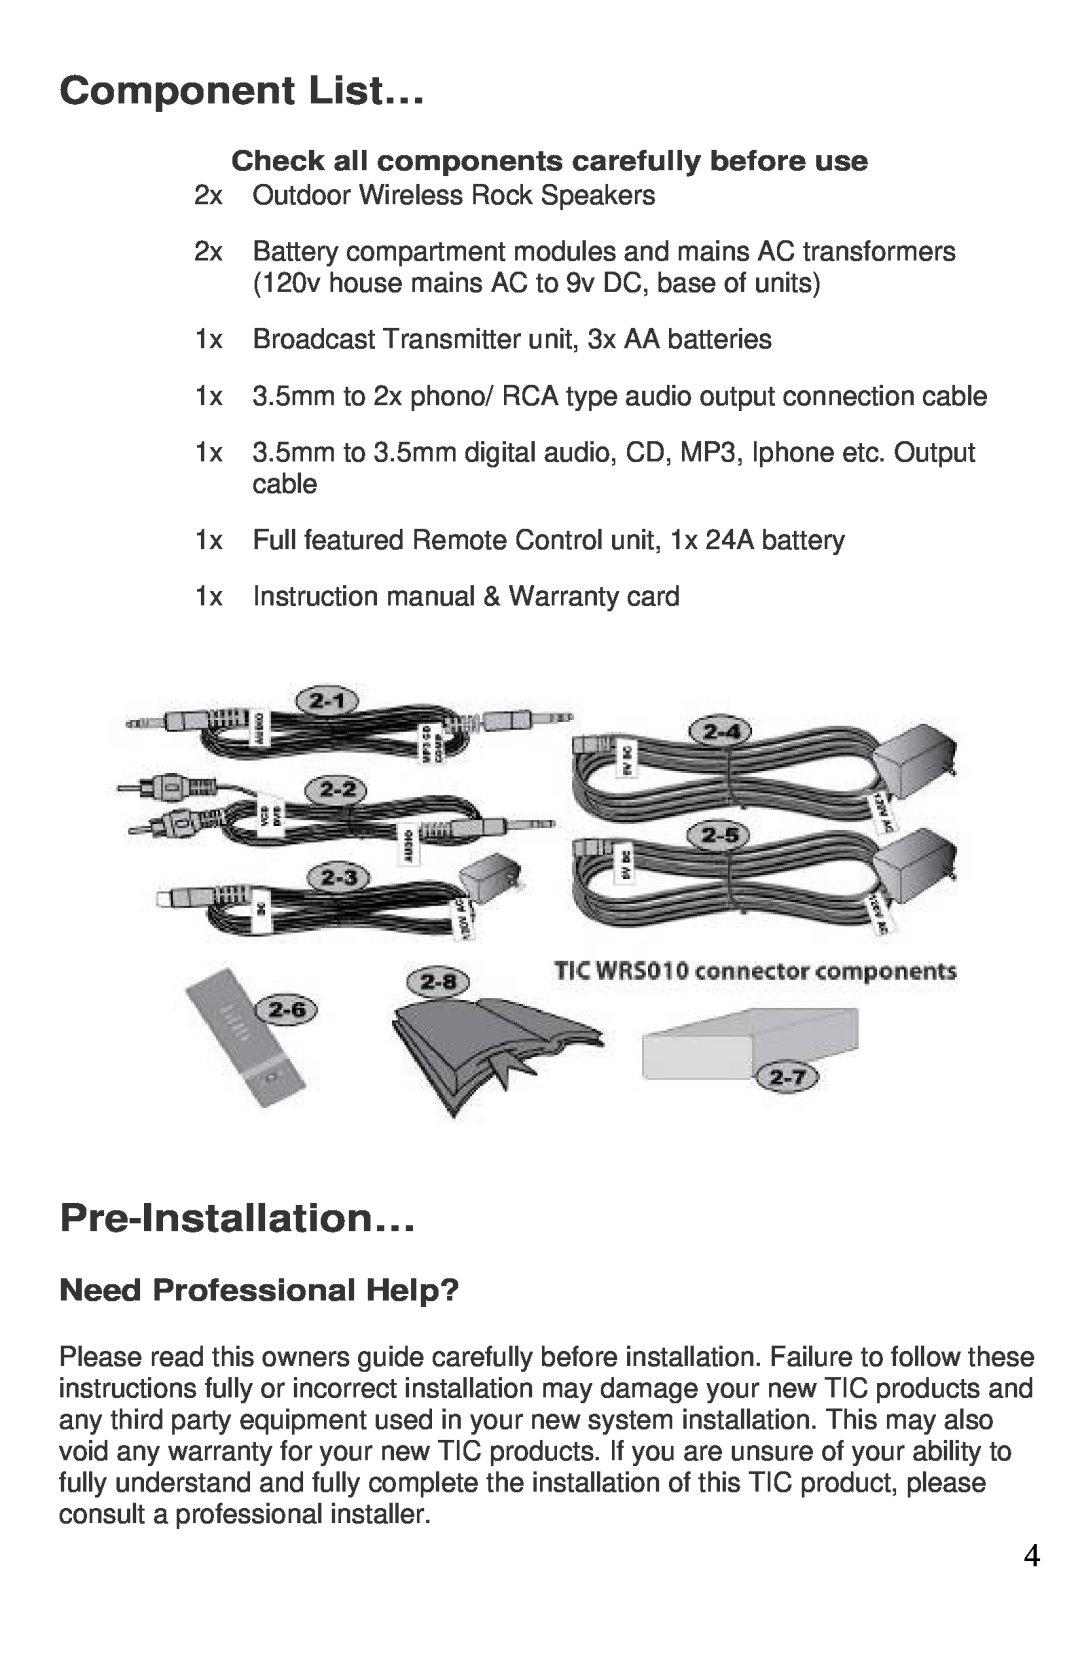 TIC WRS010 manual Component List…, Pre-Installation…, Need Professional Help?, Check all components carefully before use 